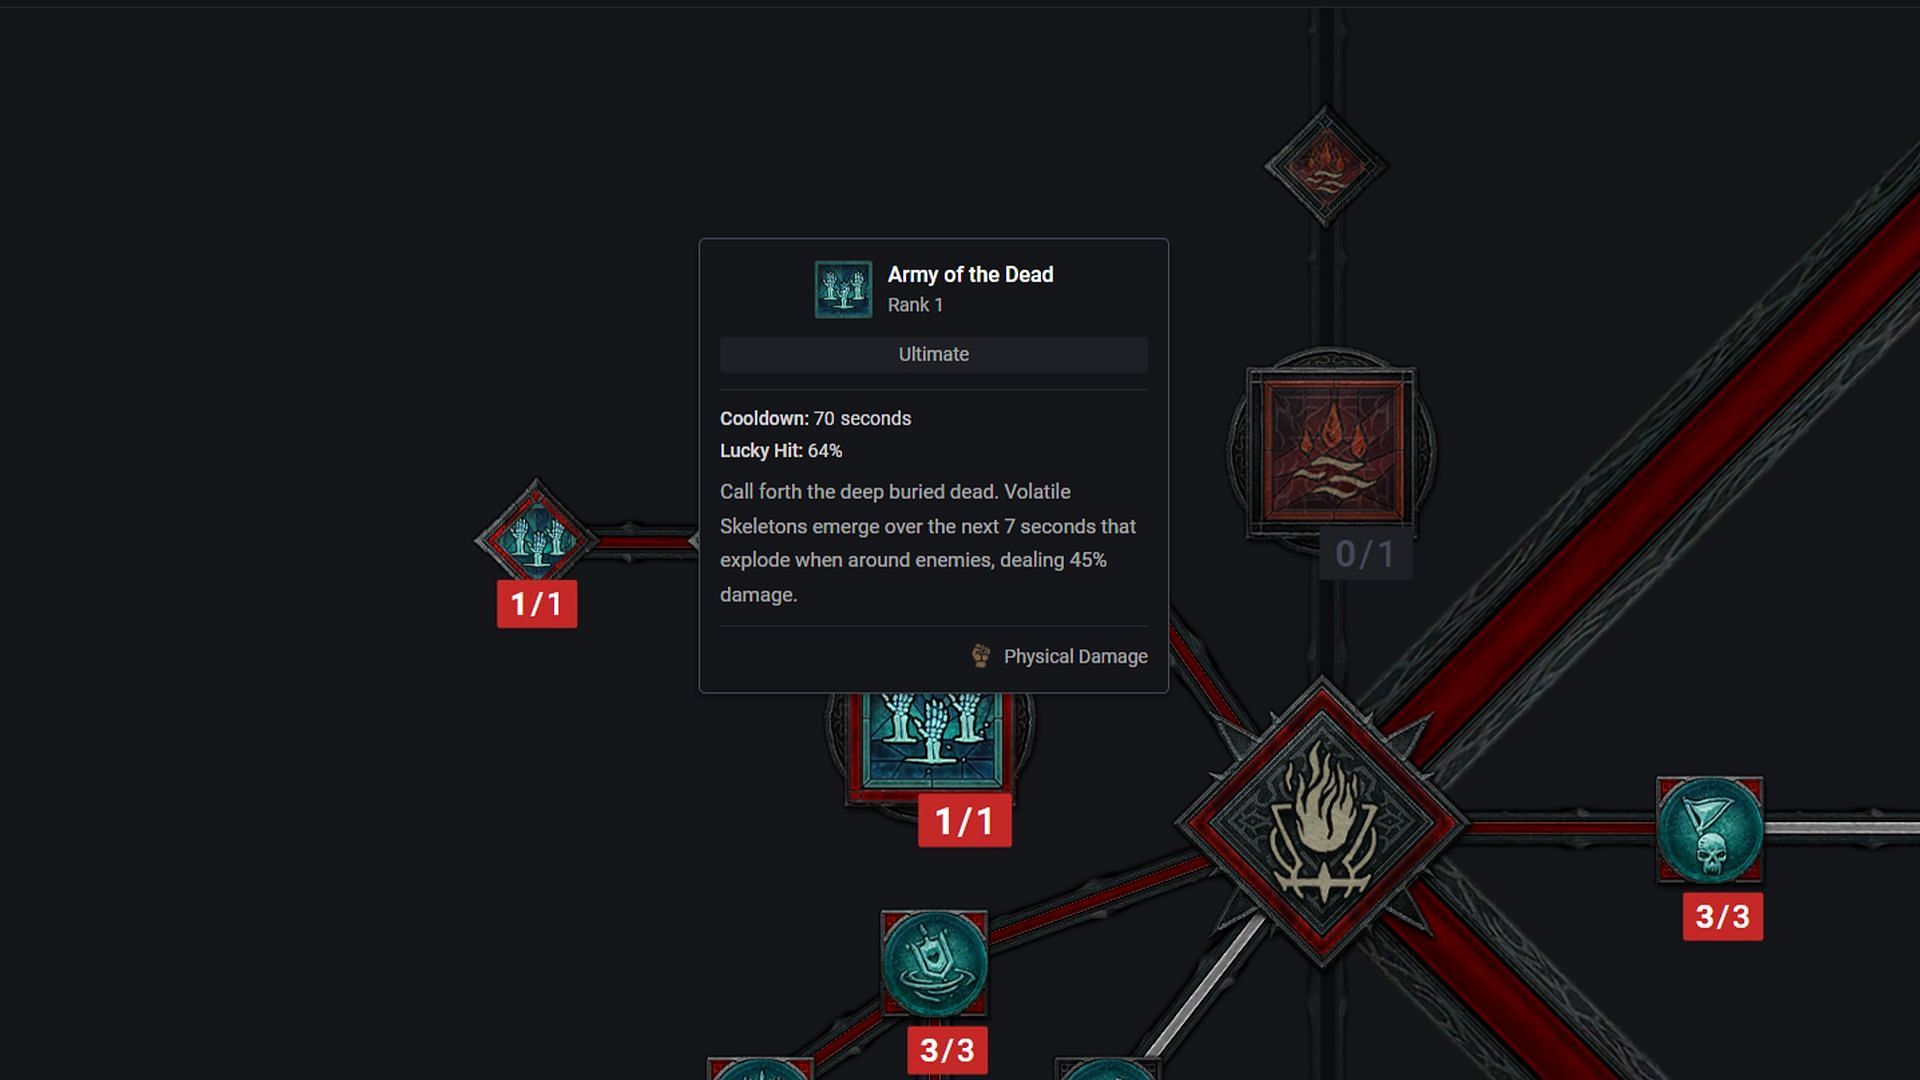 Army of the Dead will be your go-to skill in this build in Diablo 4 (Image via D4builds.gg)